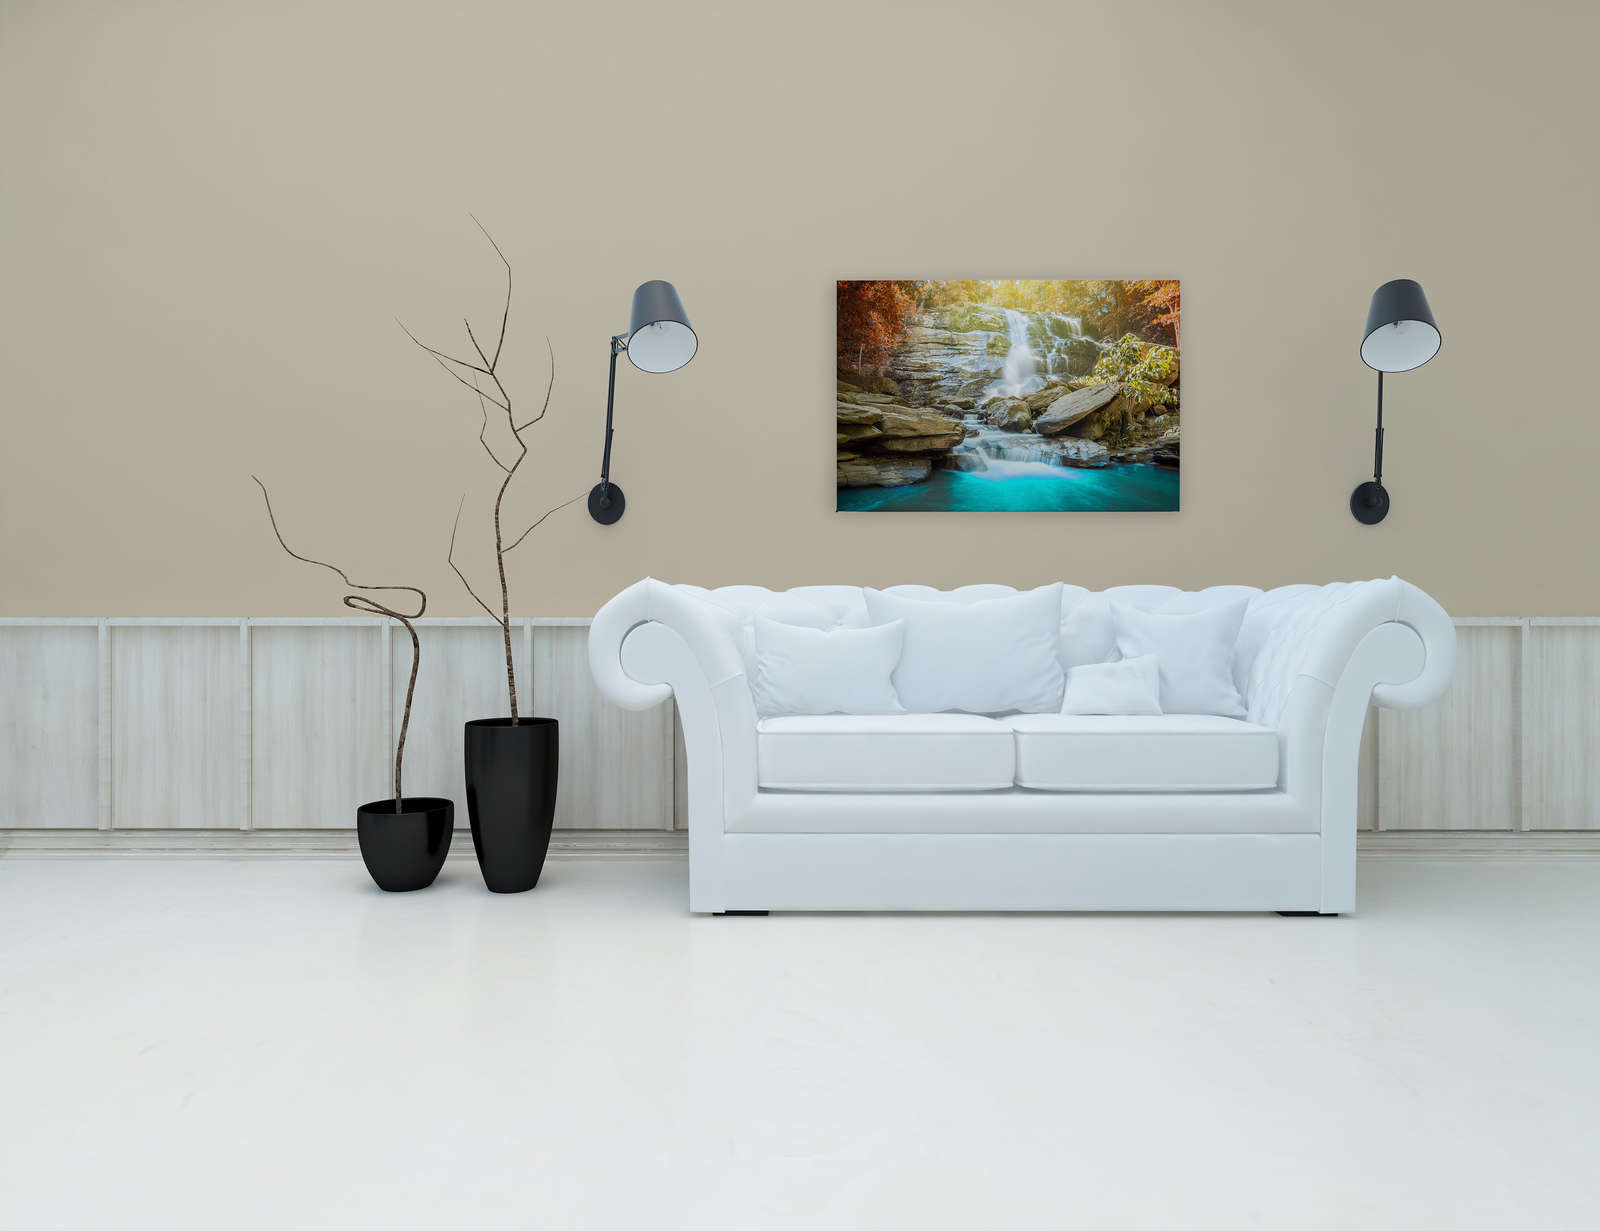             Canvas shows Idyllic Forest with Waterfall - 0.90 m x 0.60 m
        